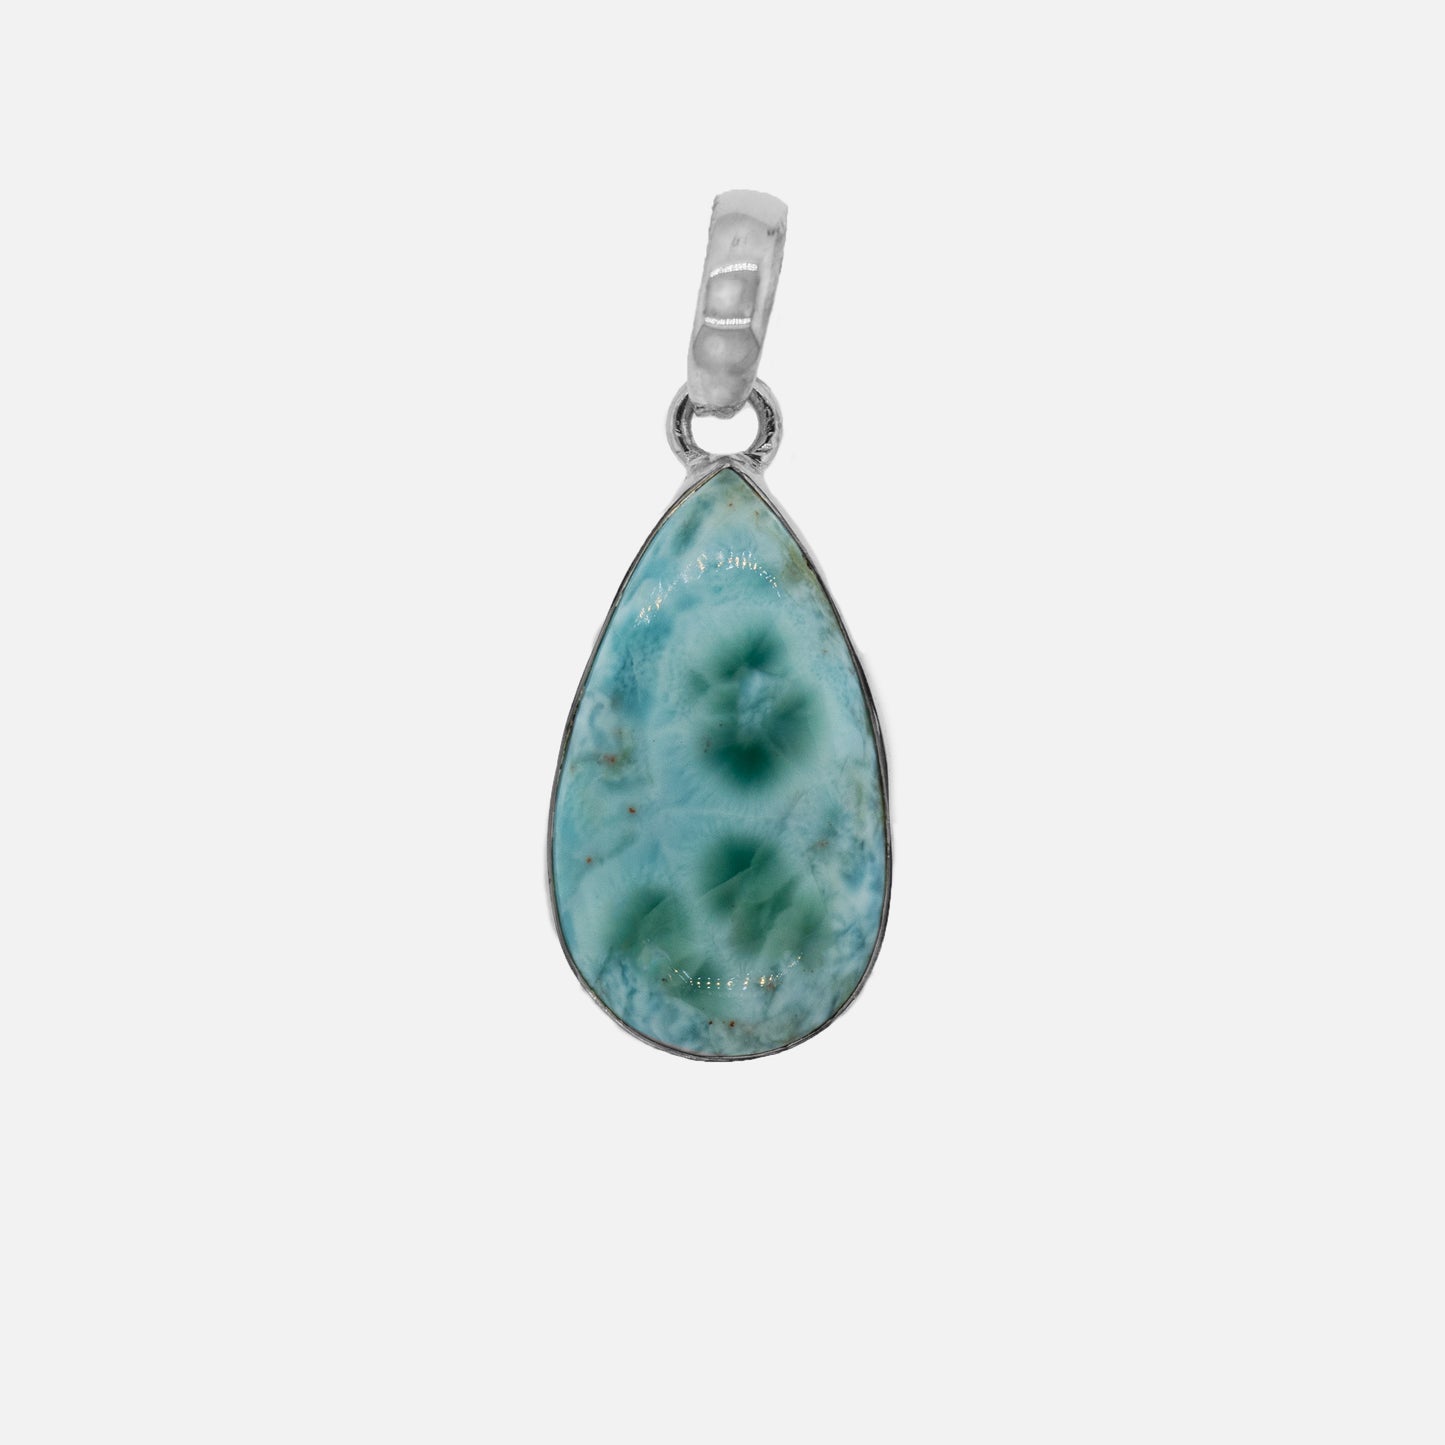 A Super Silver Larimar Teardrop Pendant with a shine on a white background.